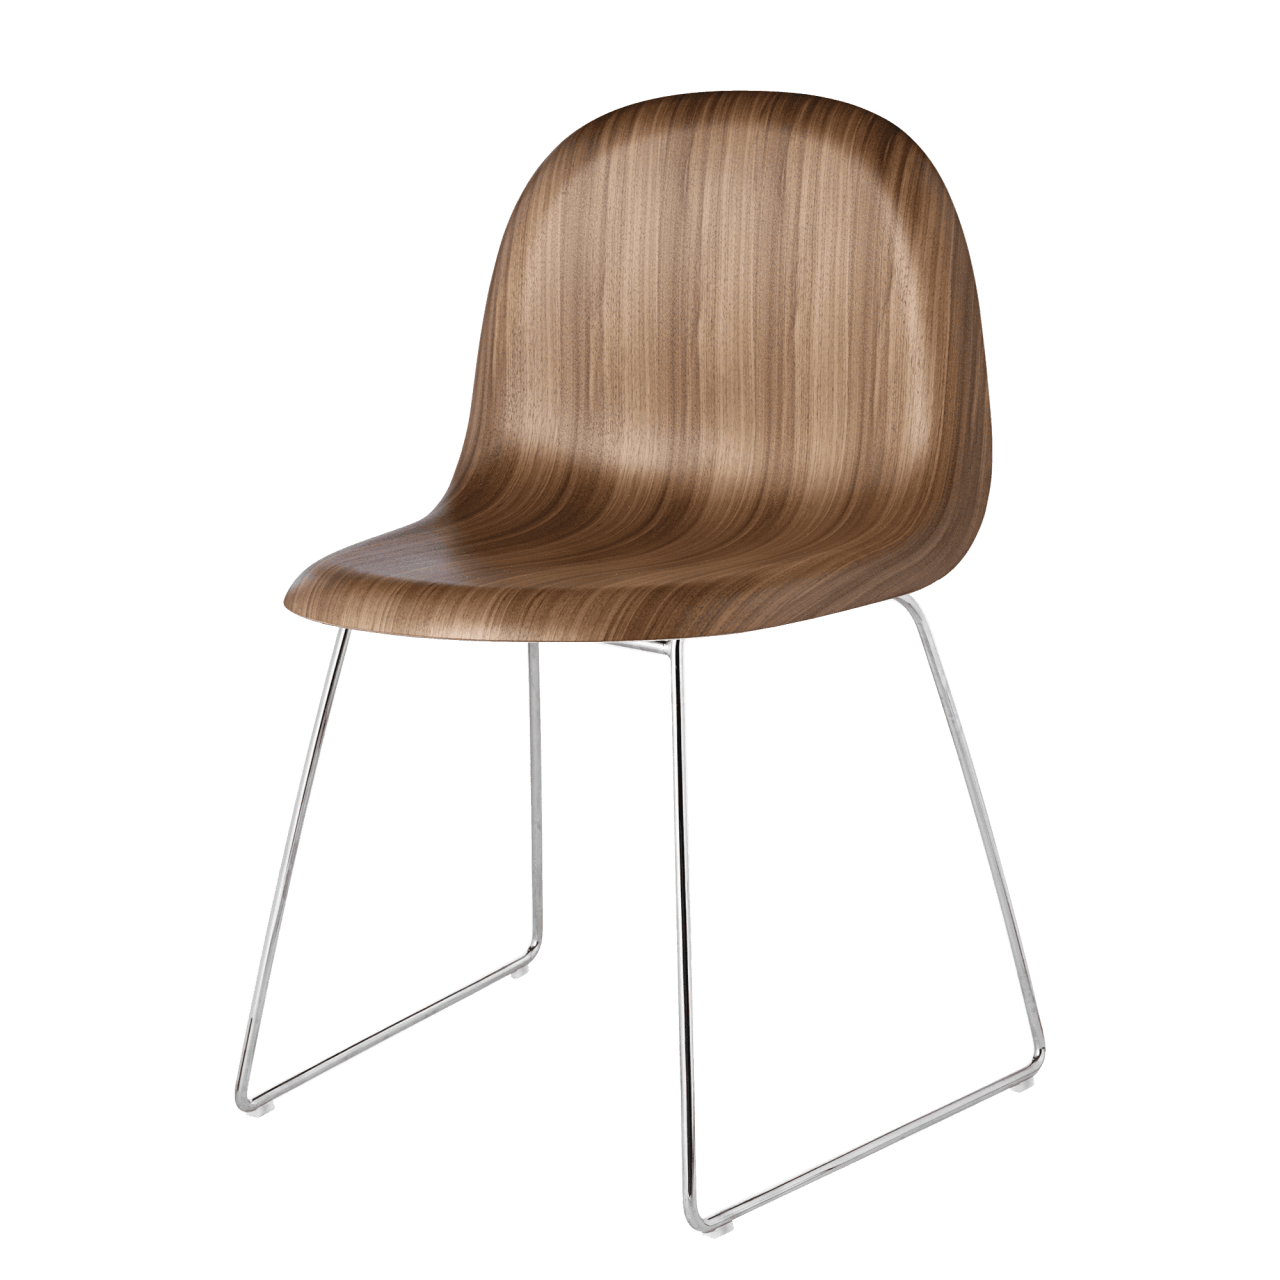 3D Dining Chair Kufengestell